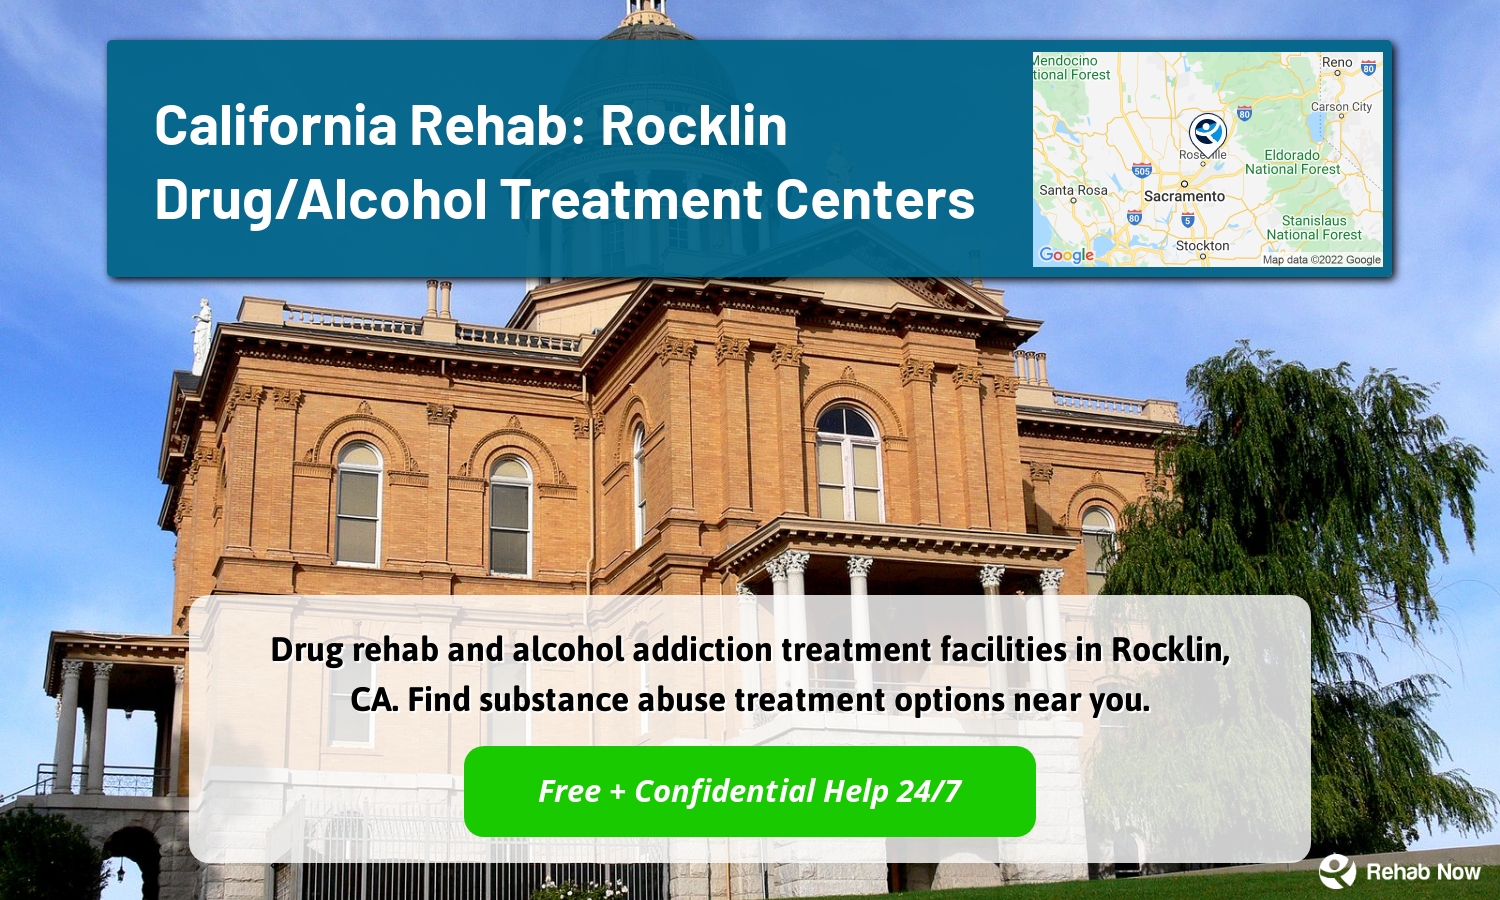 Drug rehab and alcohol addiction treatment facilities in Rocklin, CA. Find substance abuse treatment options near you.